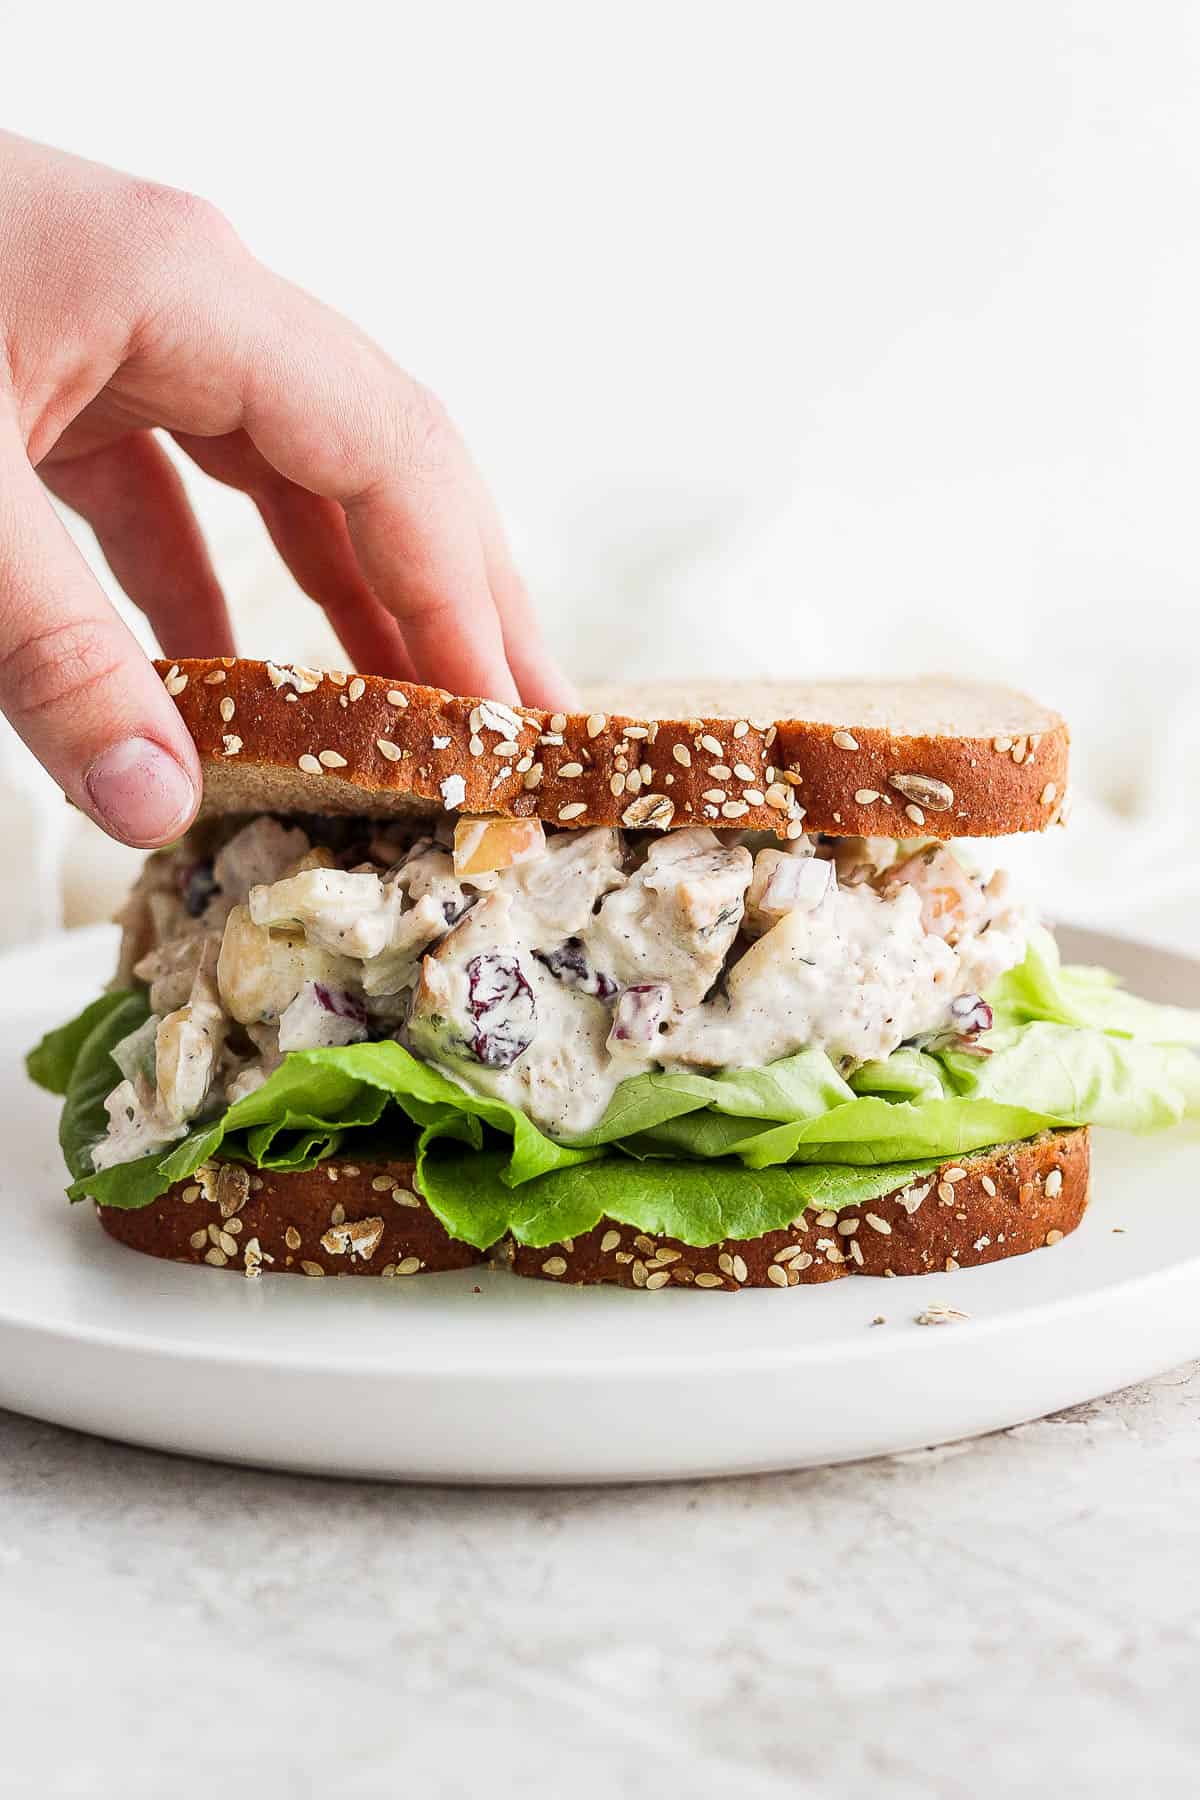 A hand placing the top piece of bread on a turkey salad sandwich.